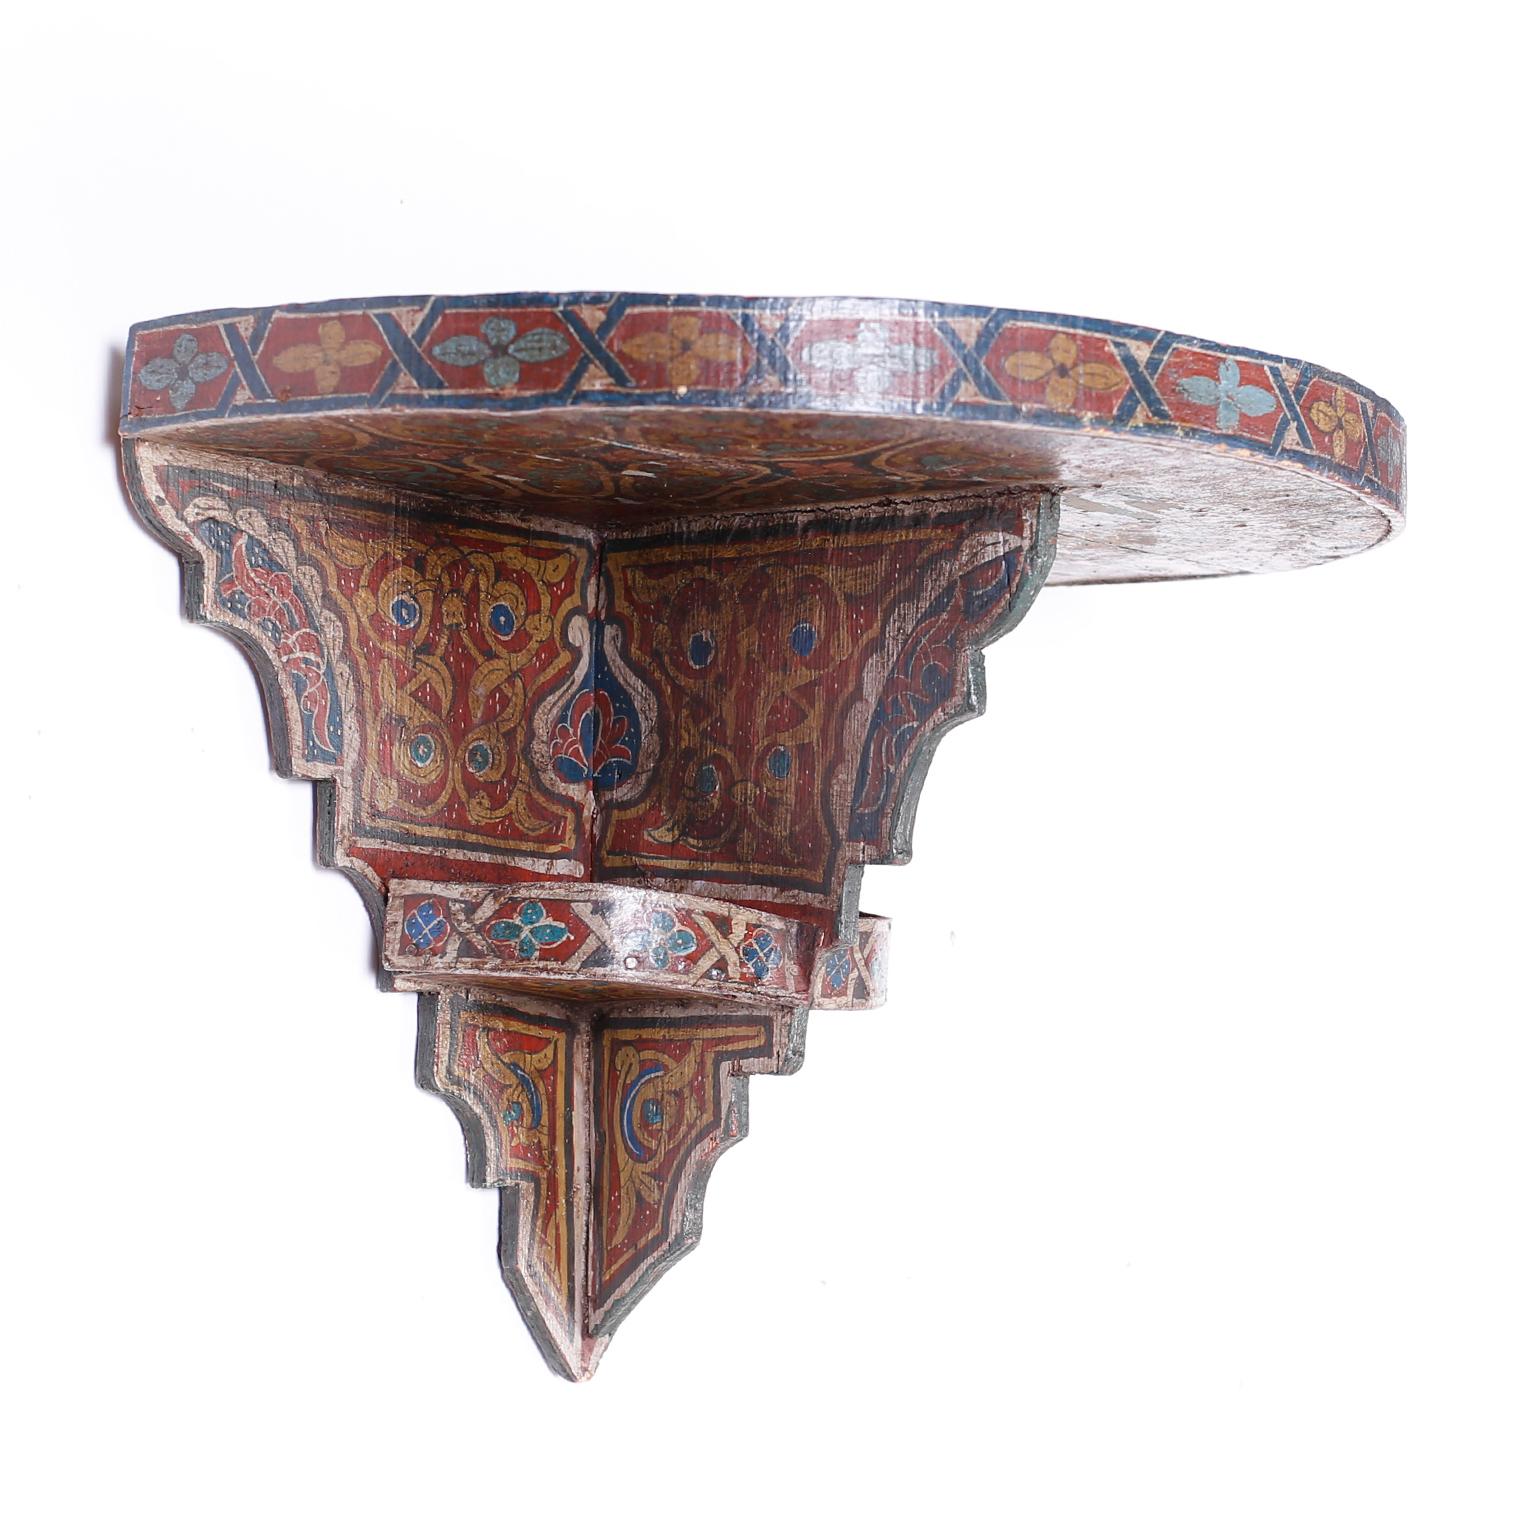 Antique Moroccan wall shelf crafted in wood with a demi lune form top shelf and painted with distinctive rustic mediterranean colors.